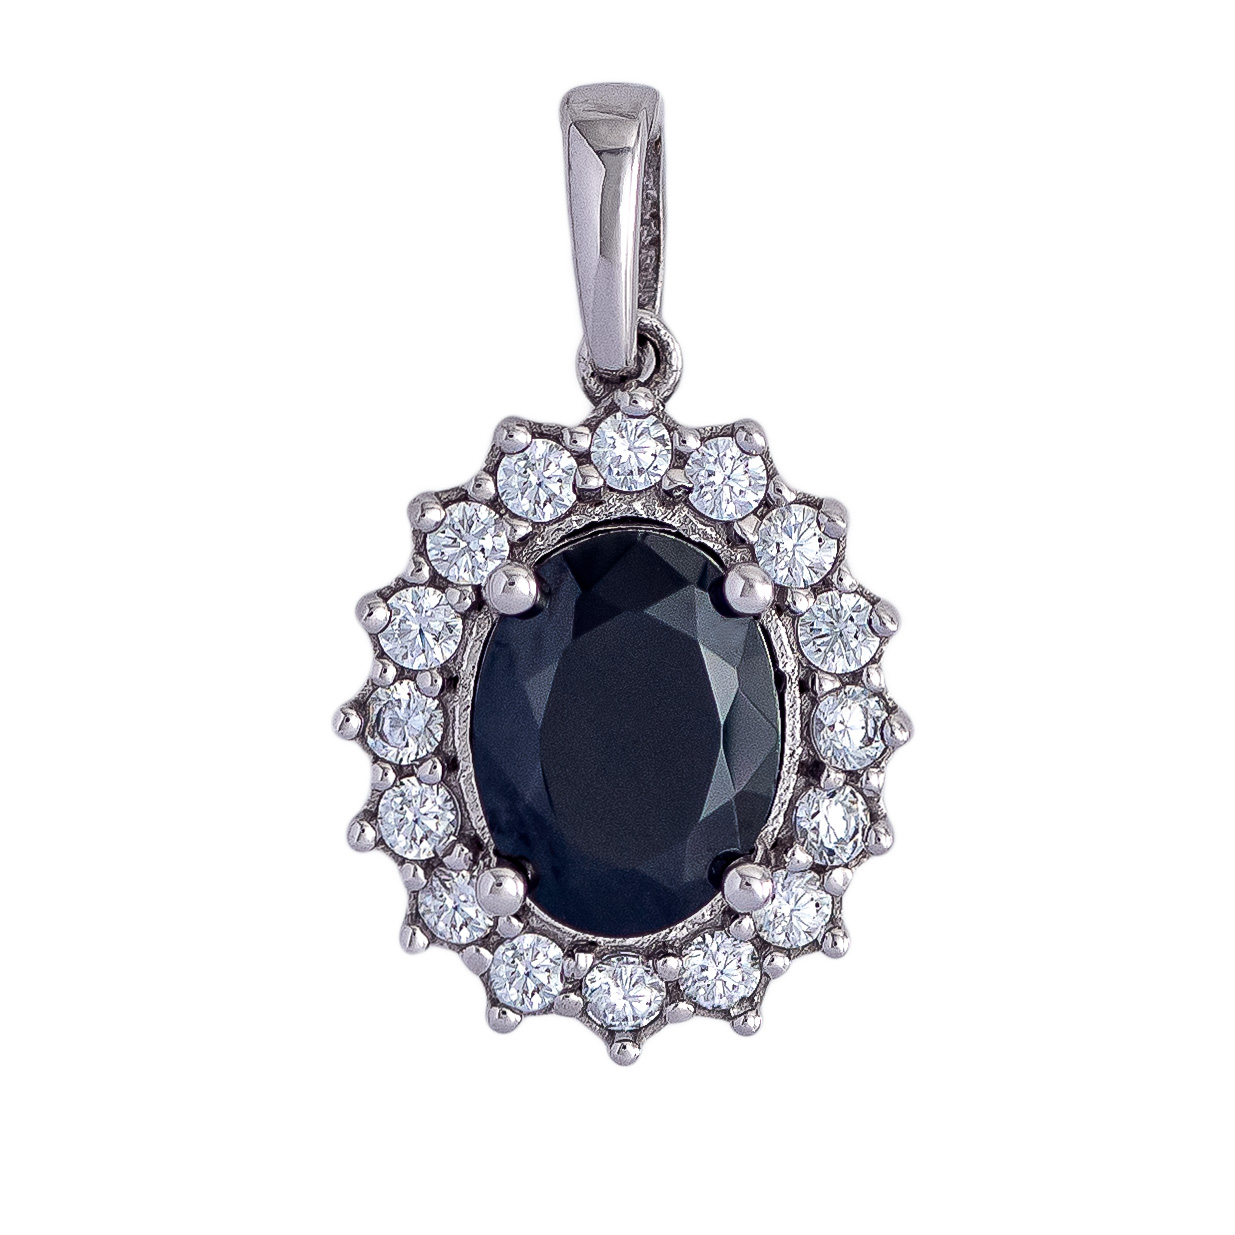 Pendant in White Gold 9kt with Black and White Zirconia